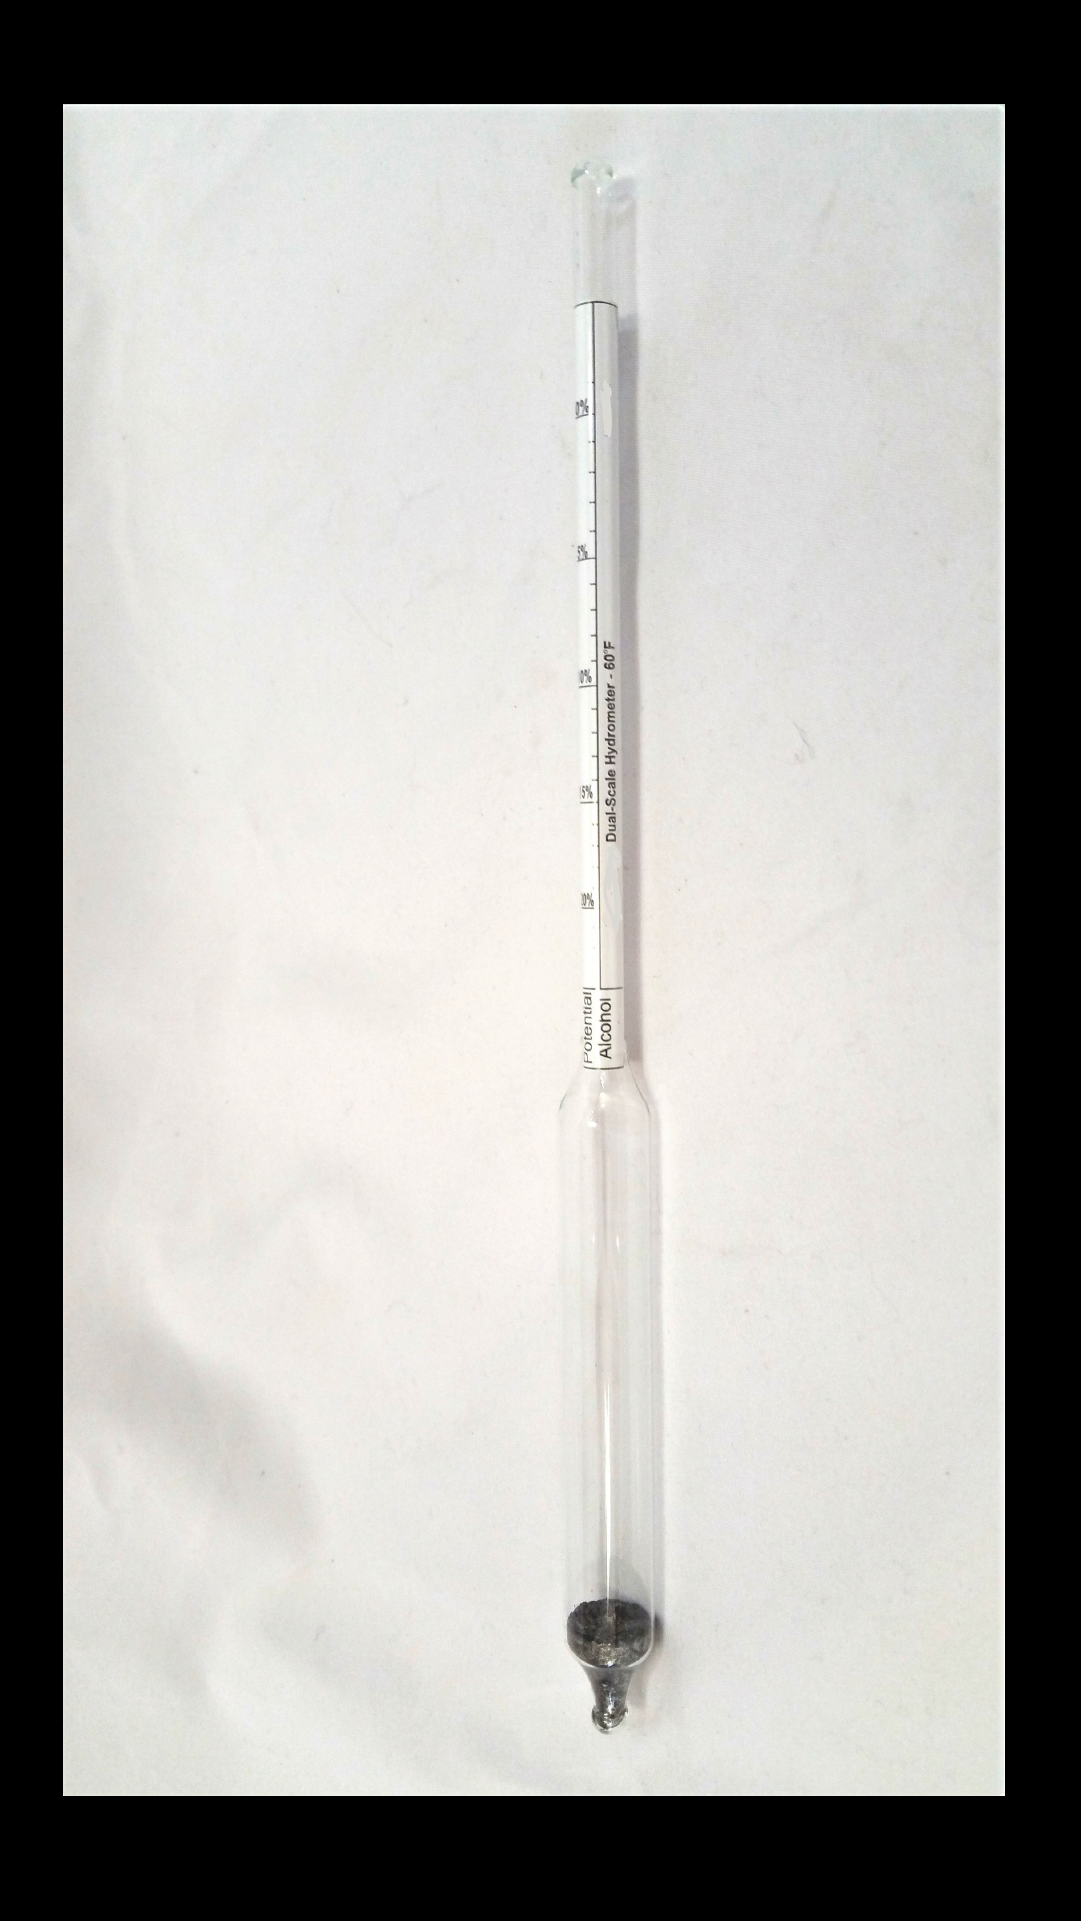 Specific Gravity Hydrometer Hydrometer Alcohol Meter Alcohol Measuring Tool